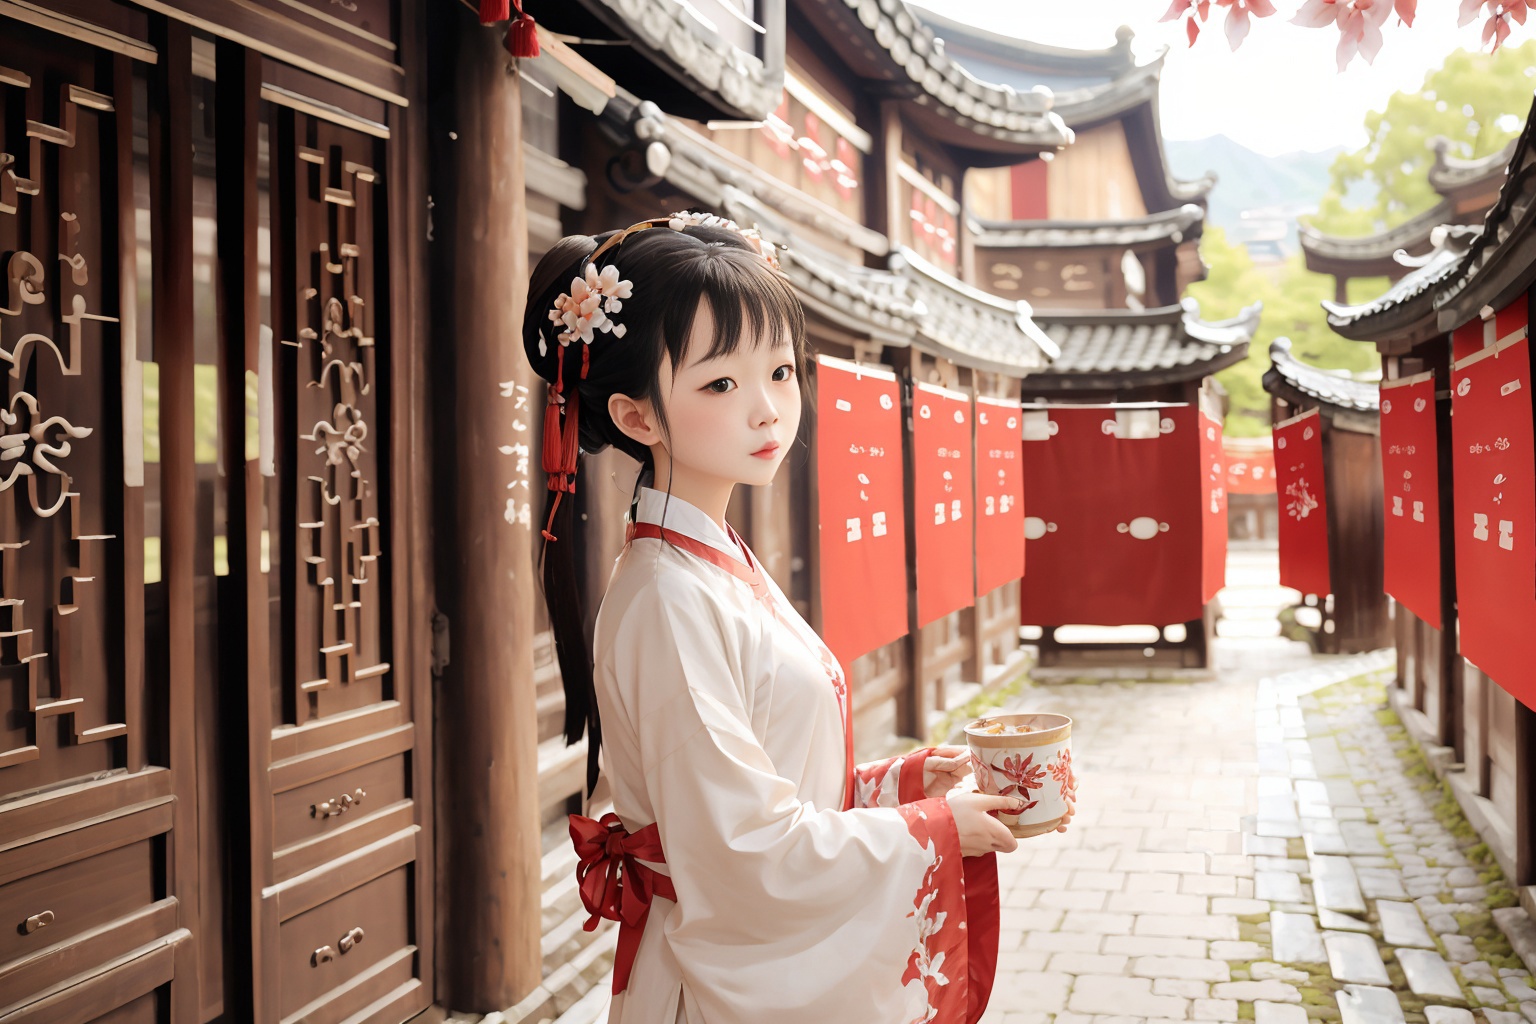 Ancient Chinese architectural style(中国古建筑样式) image by hahafofo